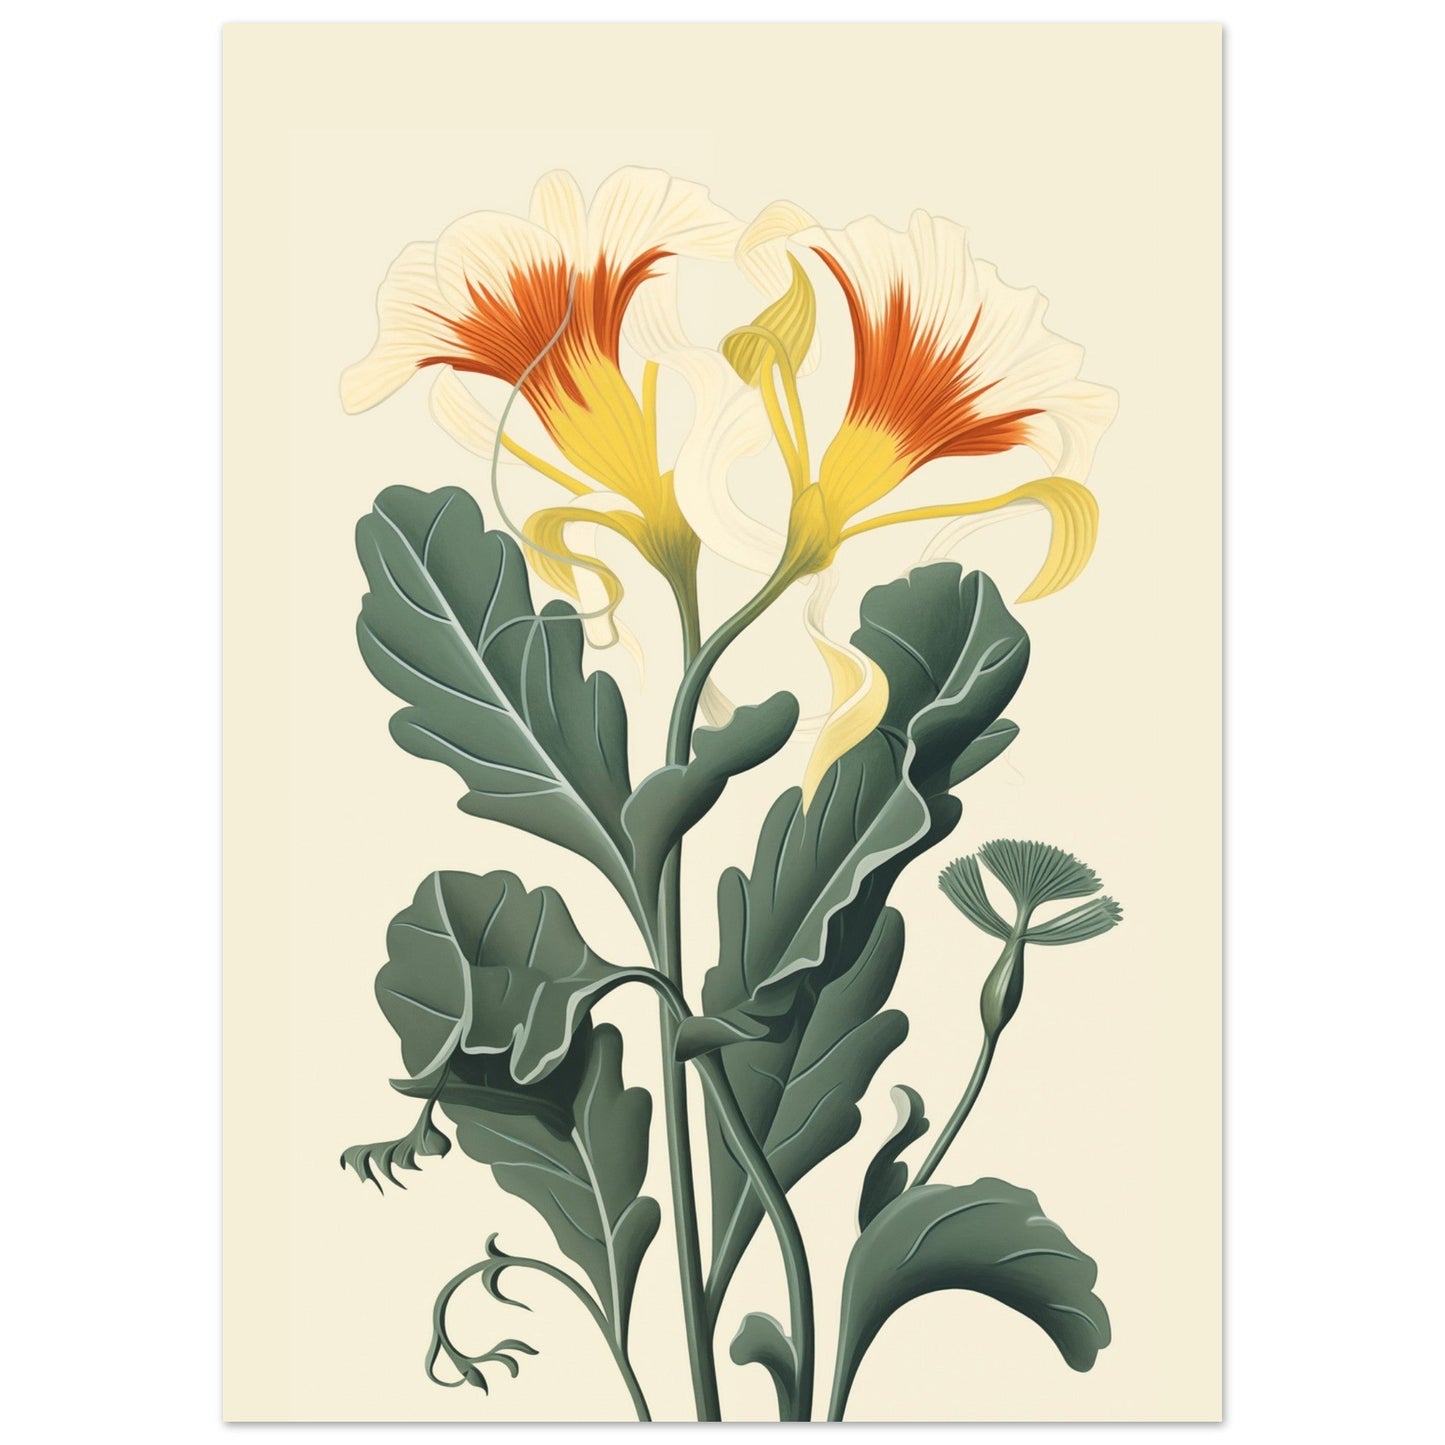 A Pop Art orange flower print on a beige background, perfect for adding color to your walls. This stunning piece of wall art, Floral Whisper, is ideal for posters in any room.